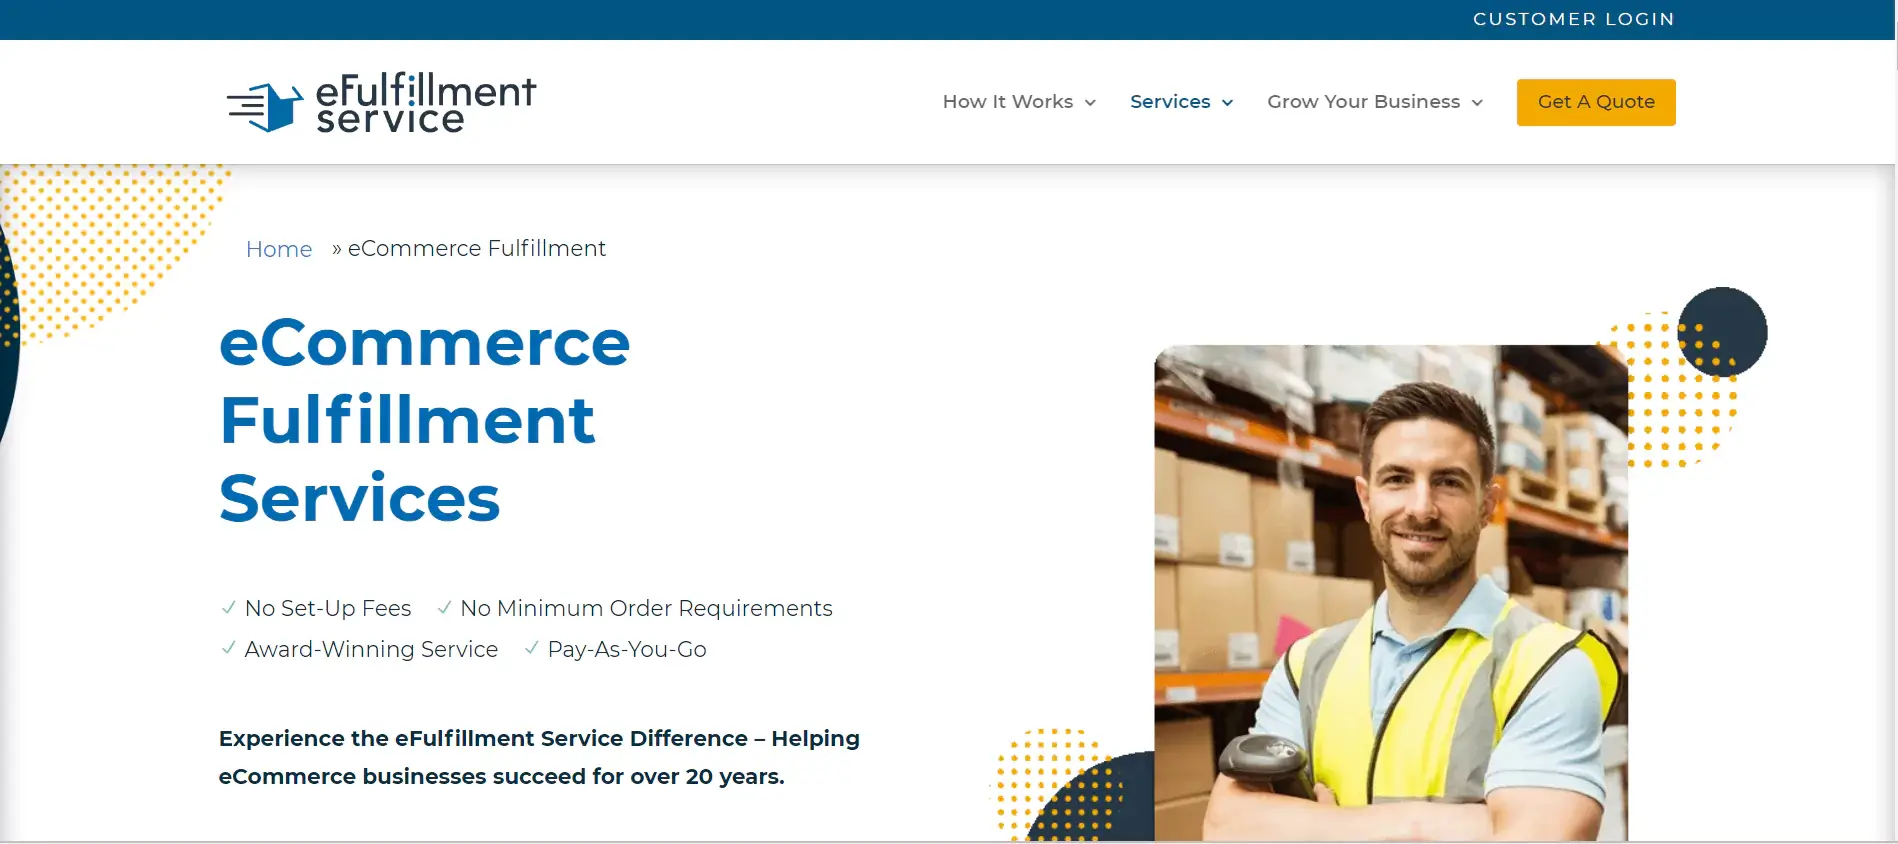 Best eCommerce fulfillment services - eFulfillment Services EFS